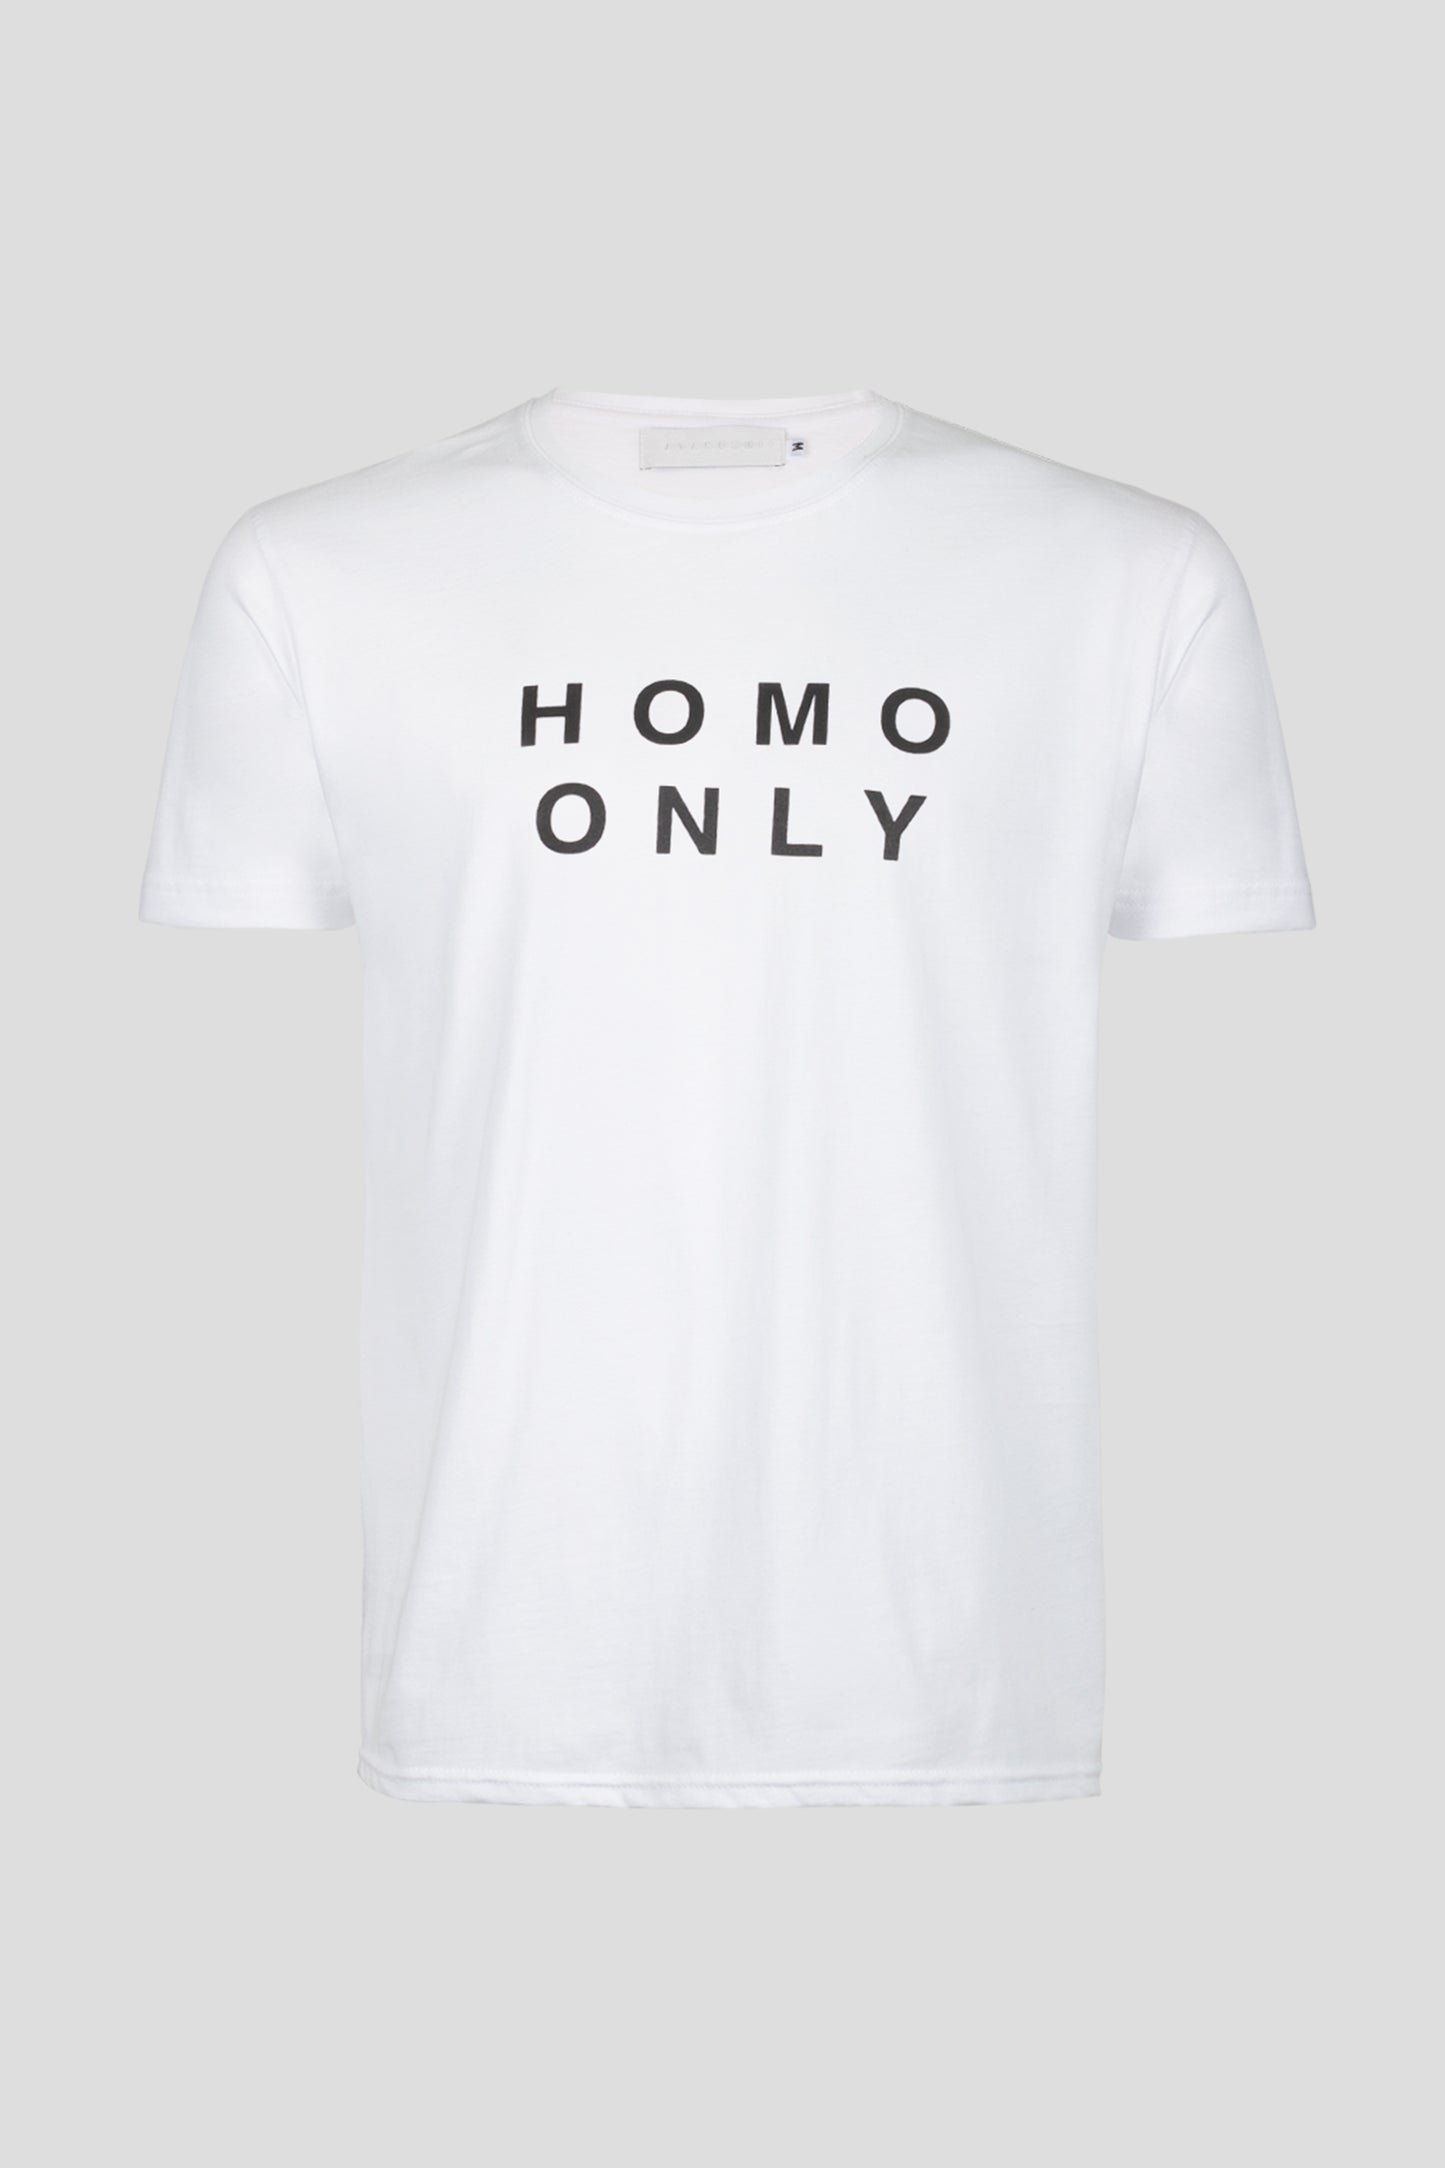 HOMO ONLY